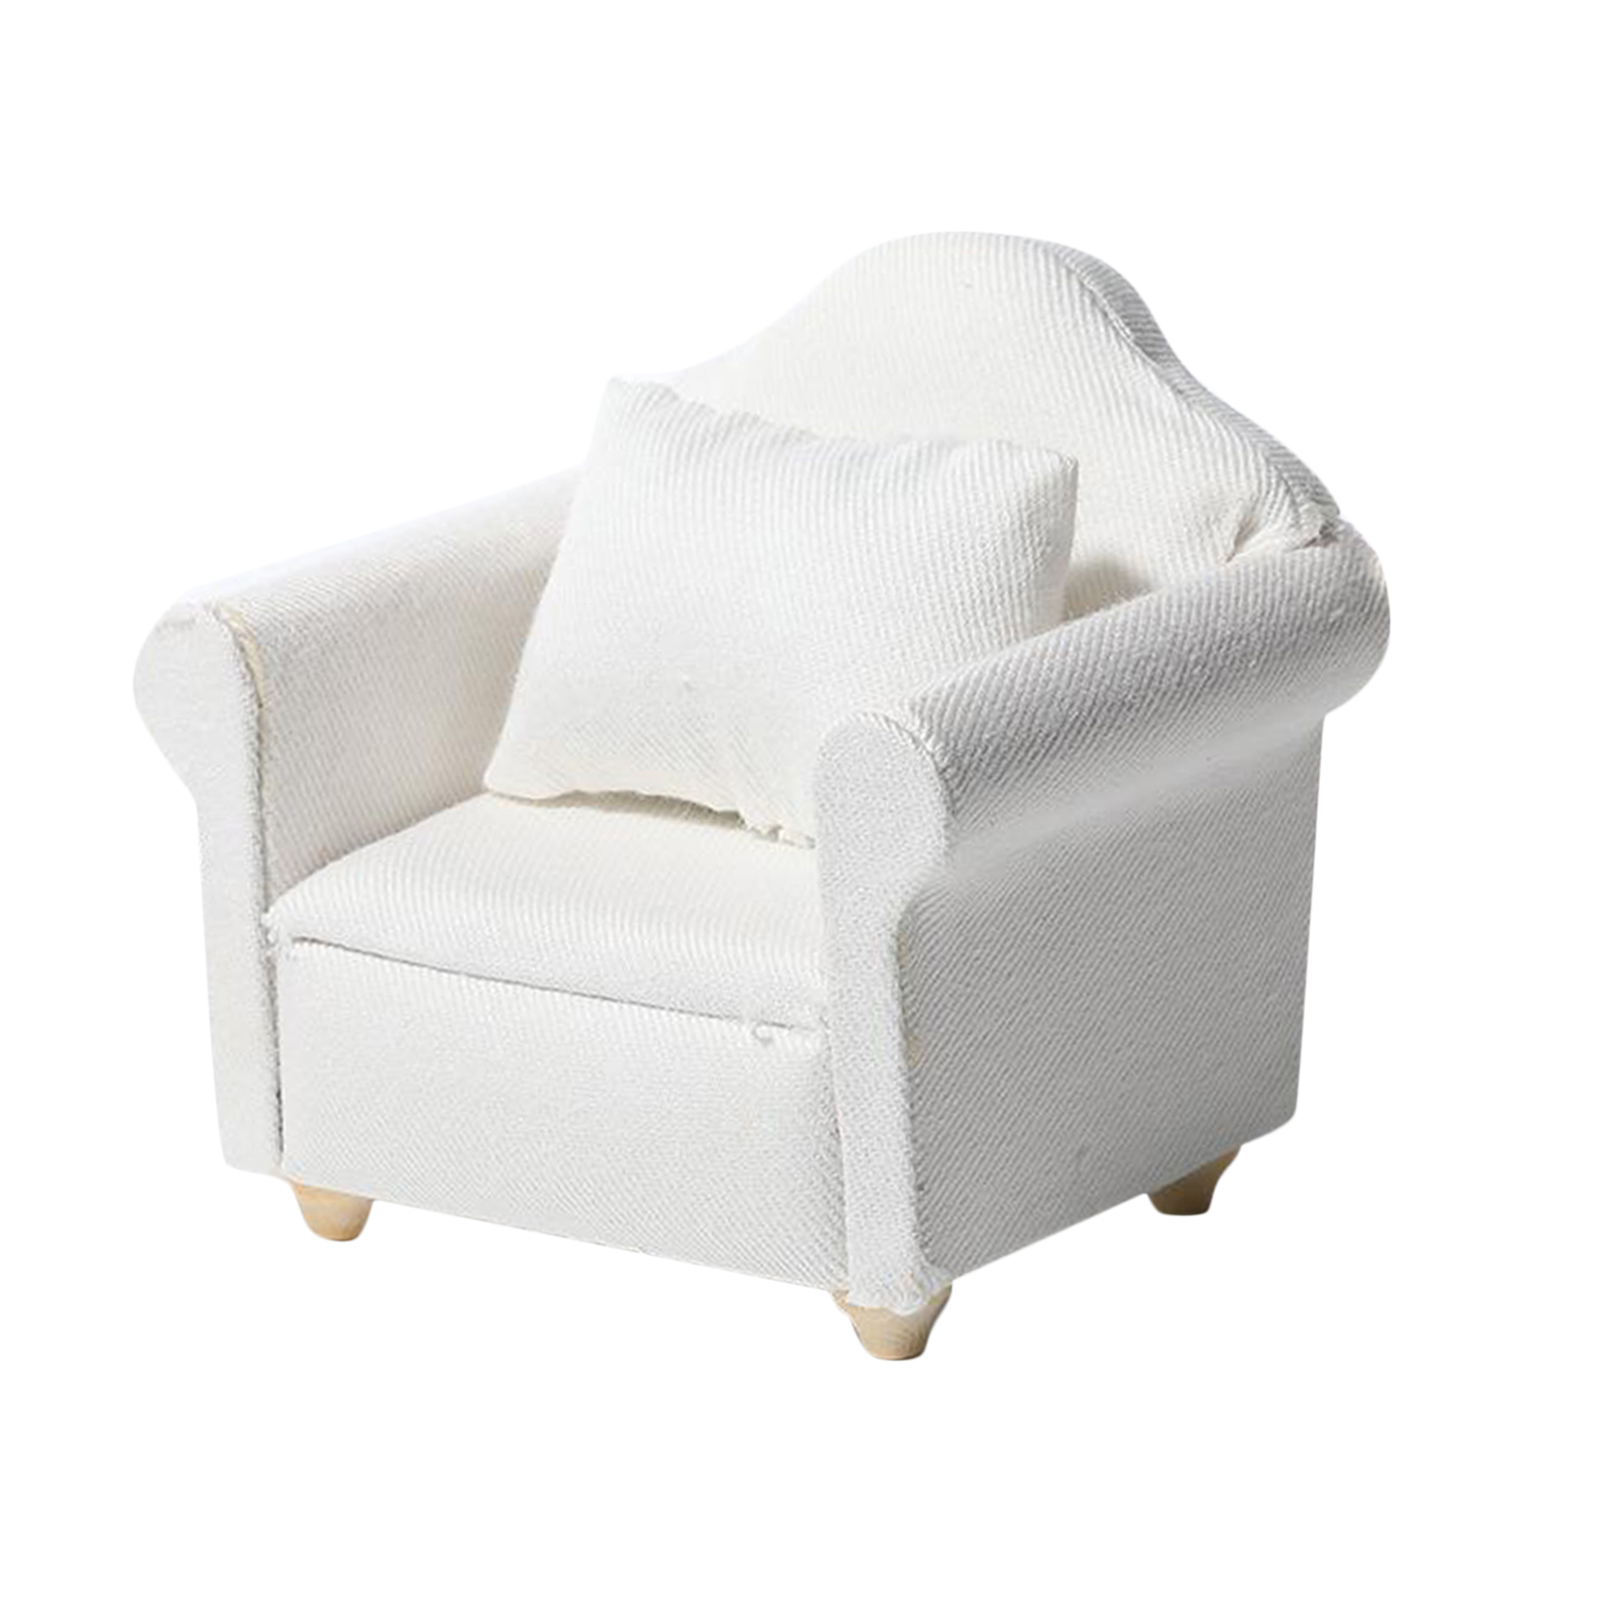 Handcrafted White 1:12 Wooden Sofa Armchair Dollhouse Miniatures Furniture Living Room